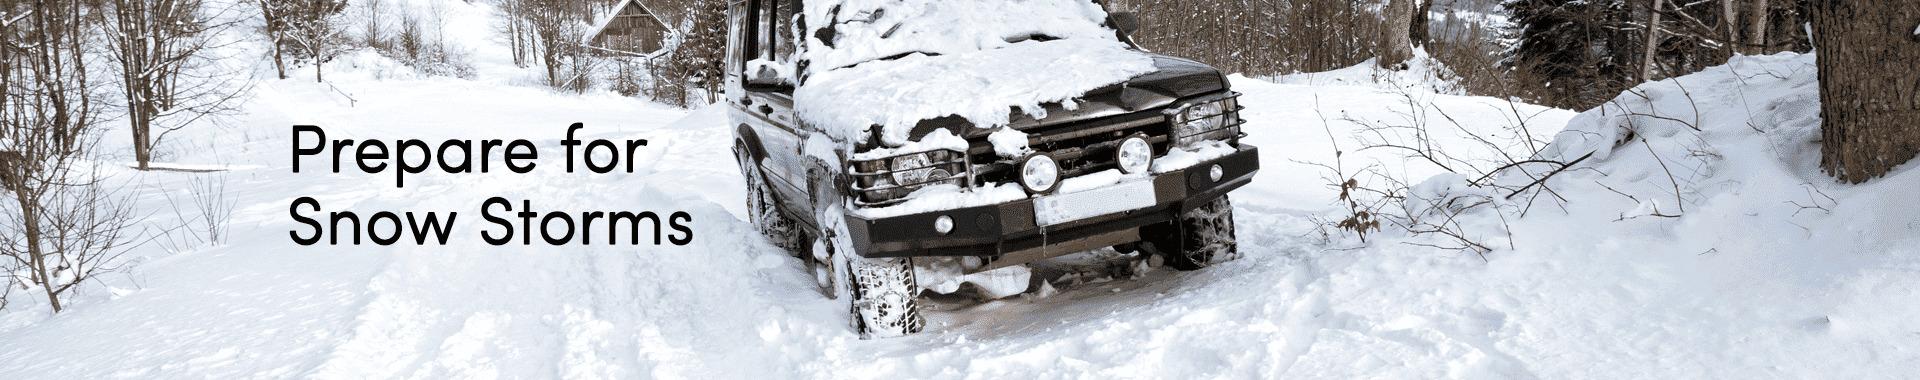 Discover Prep Your Car For Snow Storm For Your Vehicle